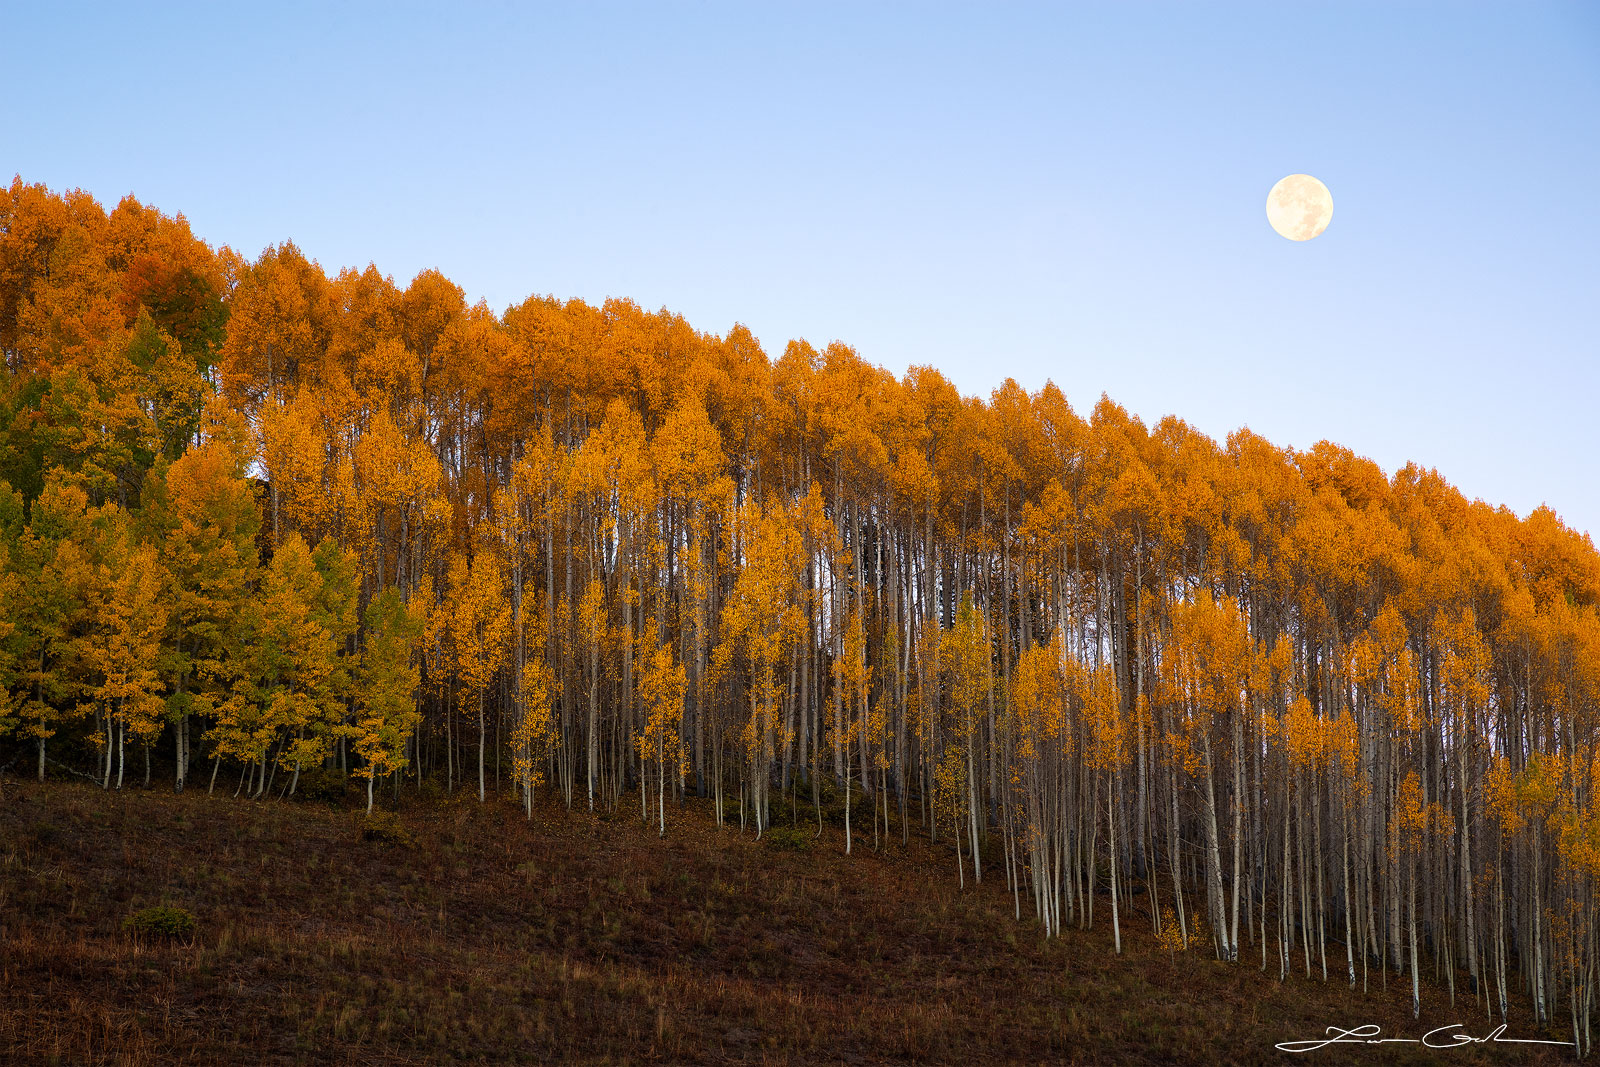 Colorful aspen trees against a full moon on a Colorado hillside - vibrant fall colors in nature's glory. - Gintchin Fine Art